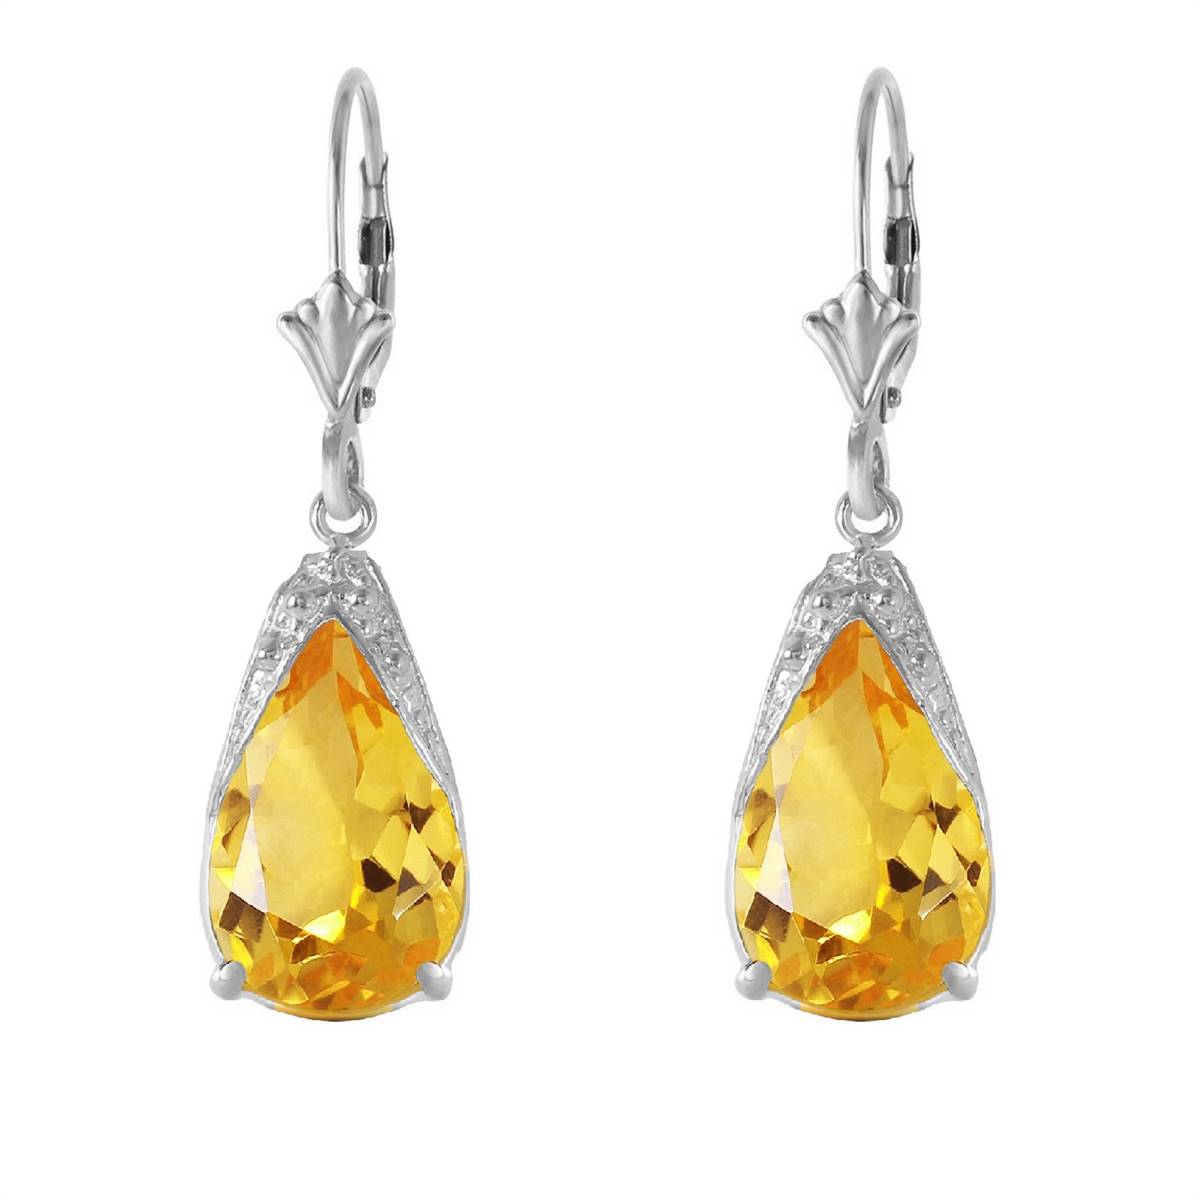 10 Carat 14K Solid White Gold Leverback Earrings Natural Citrine